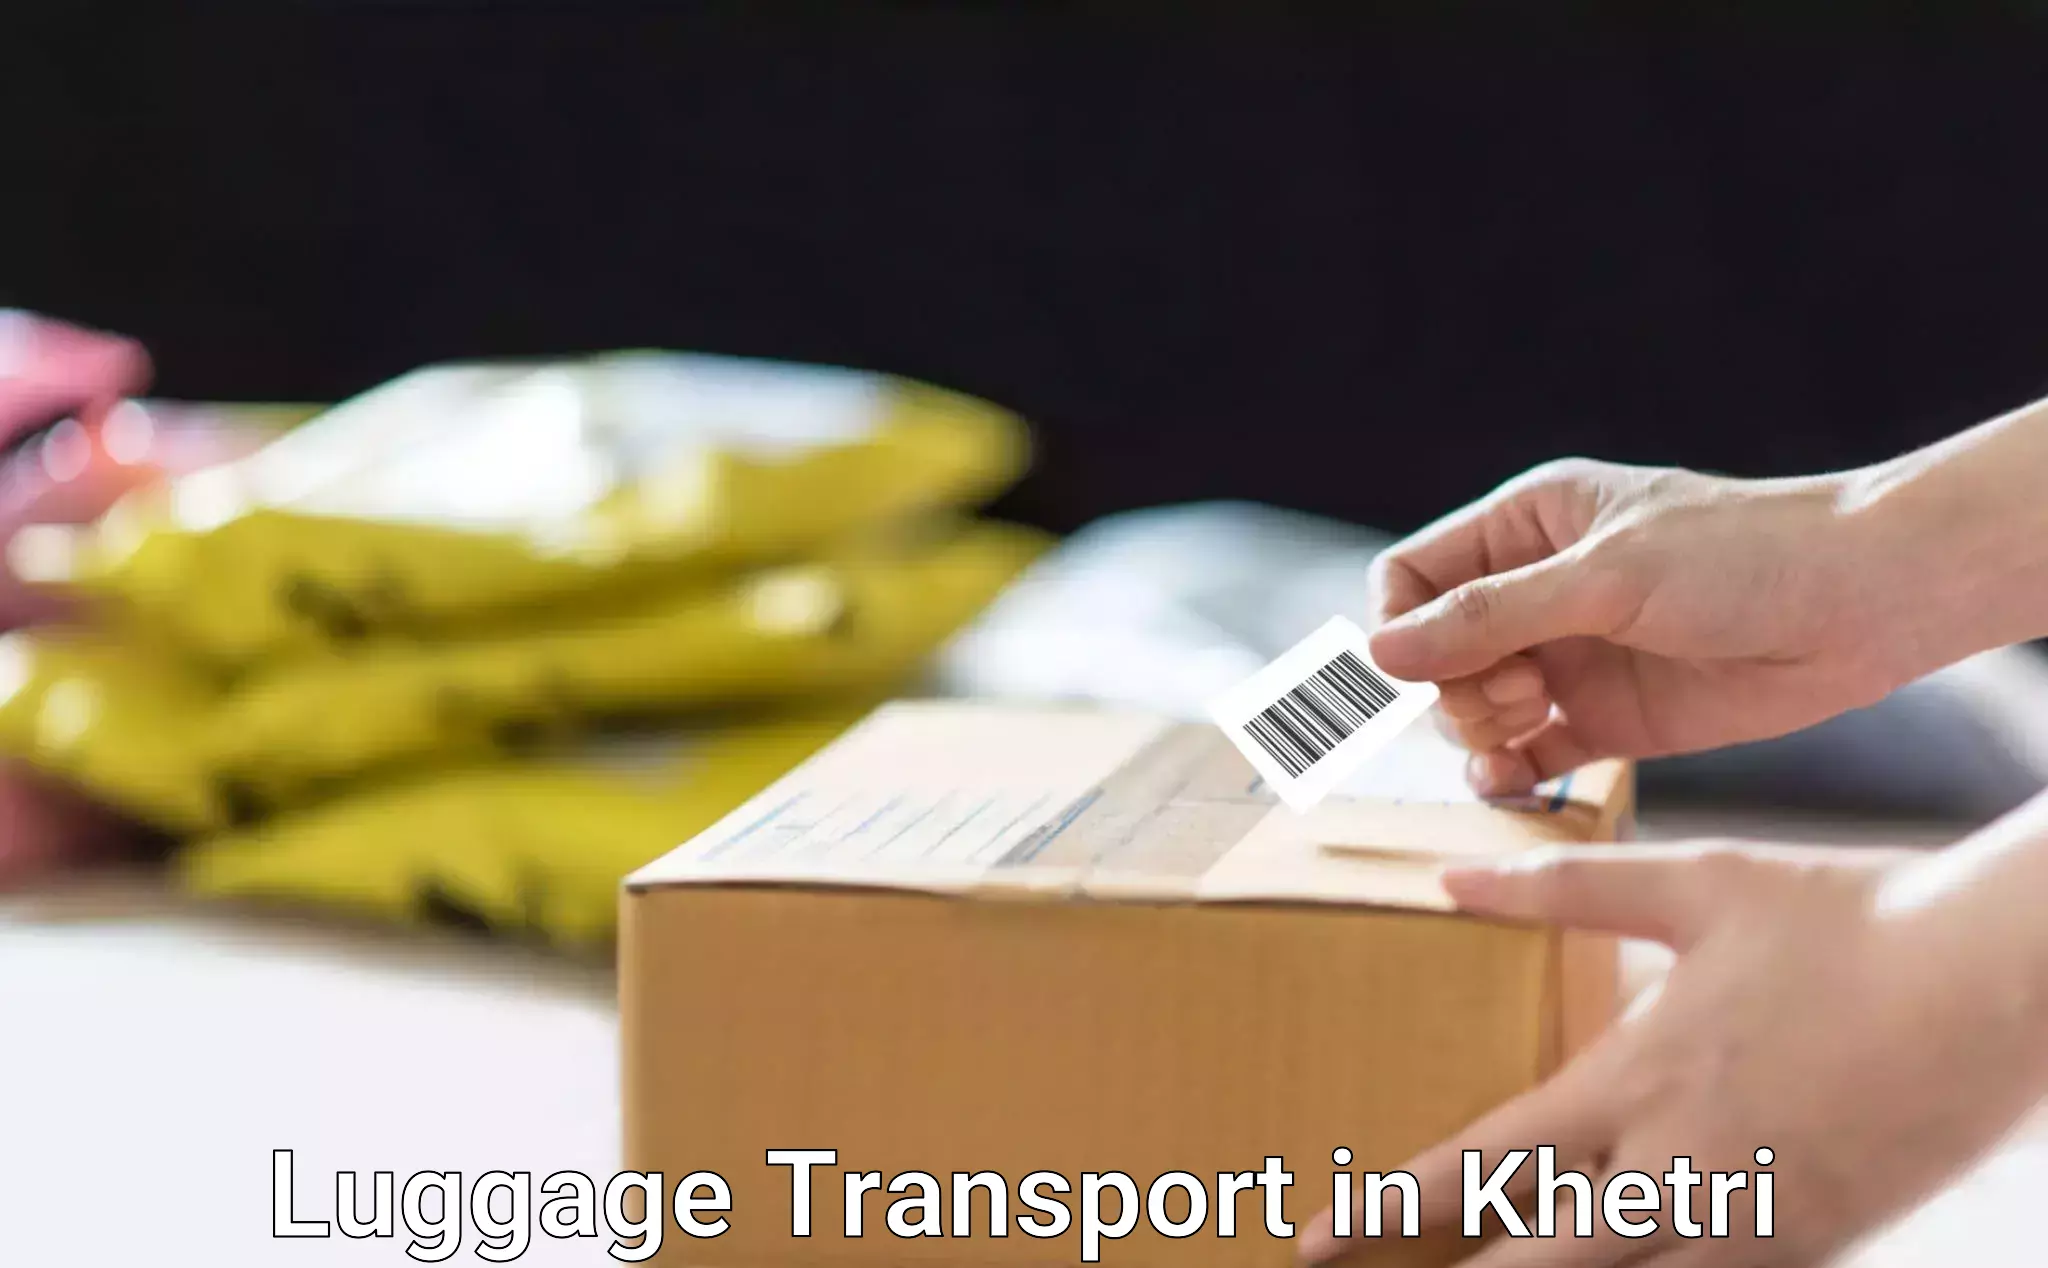 Automated luggage transport in Khetri